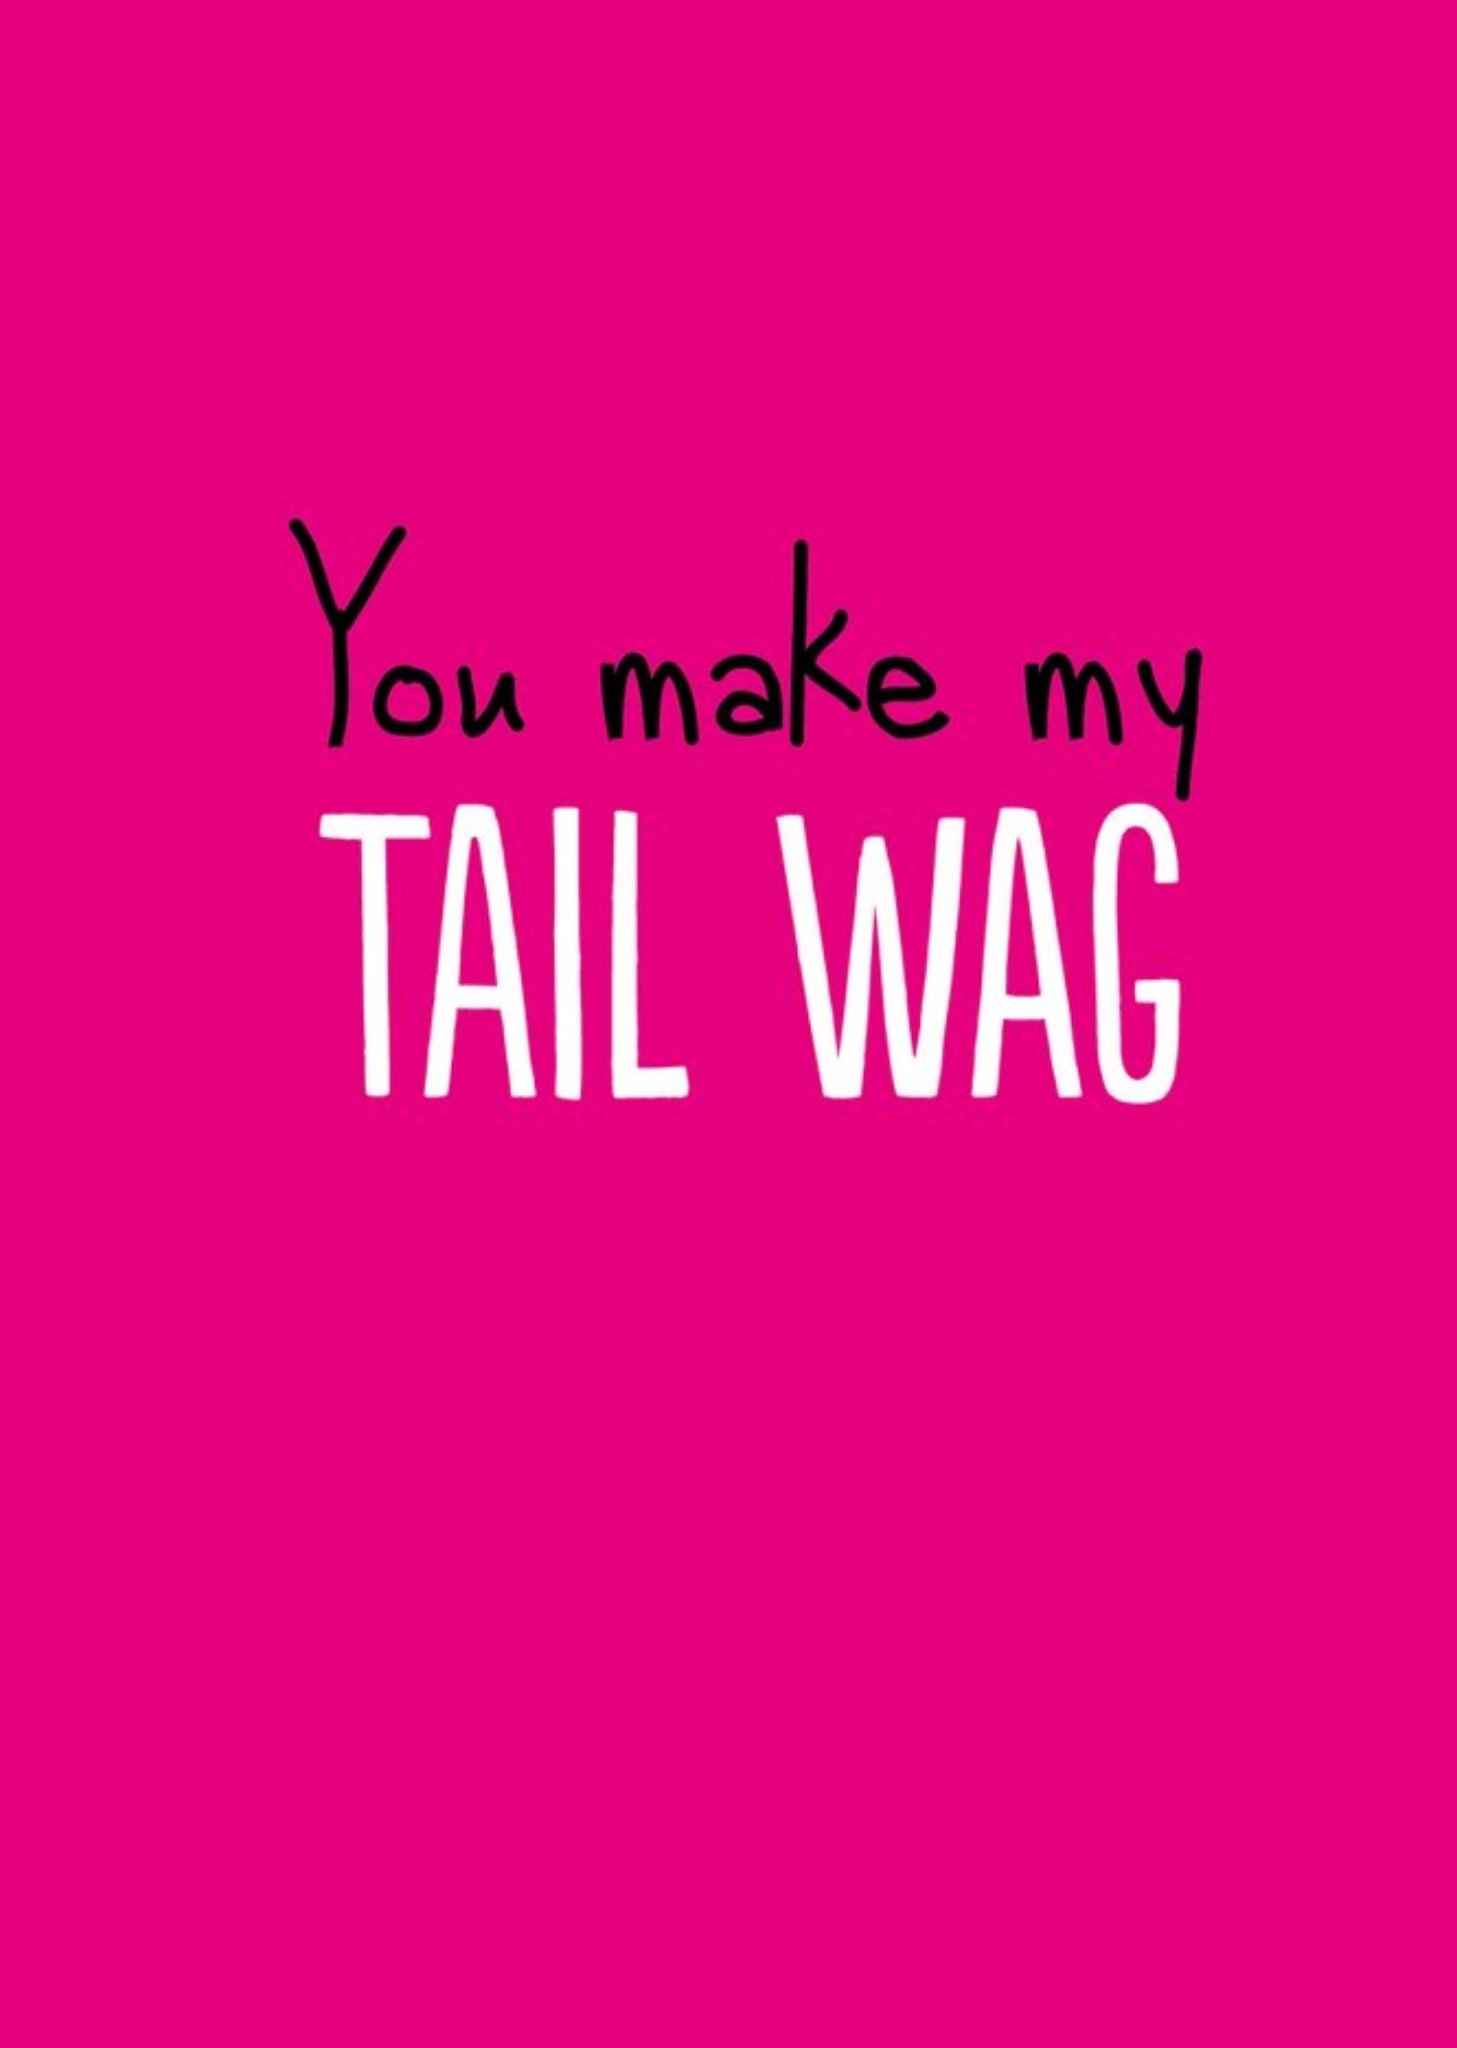 Moonpig Humourous Typography On A Vibrant Pink Background Valentines Day Card, Large